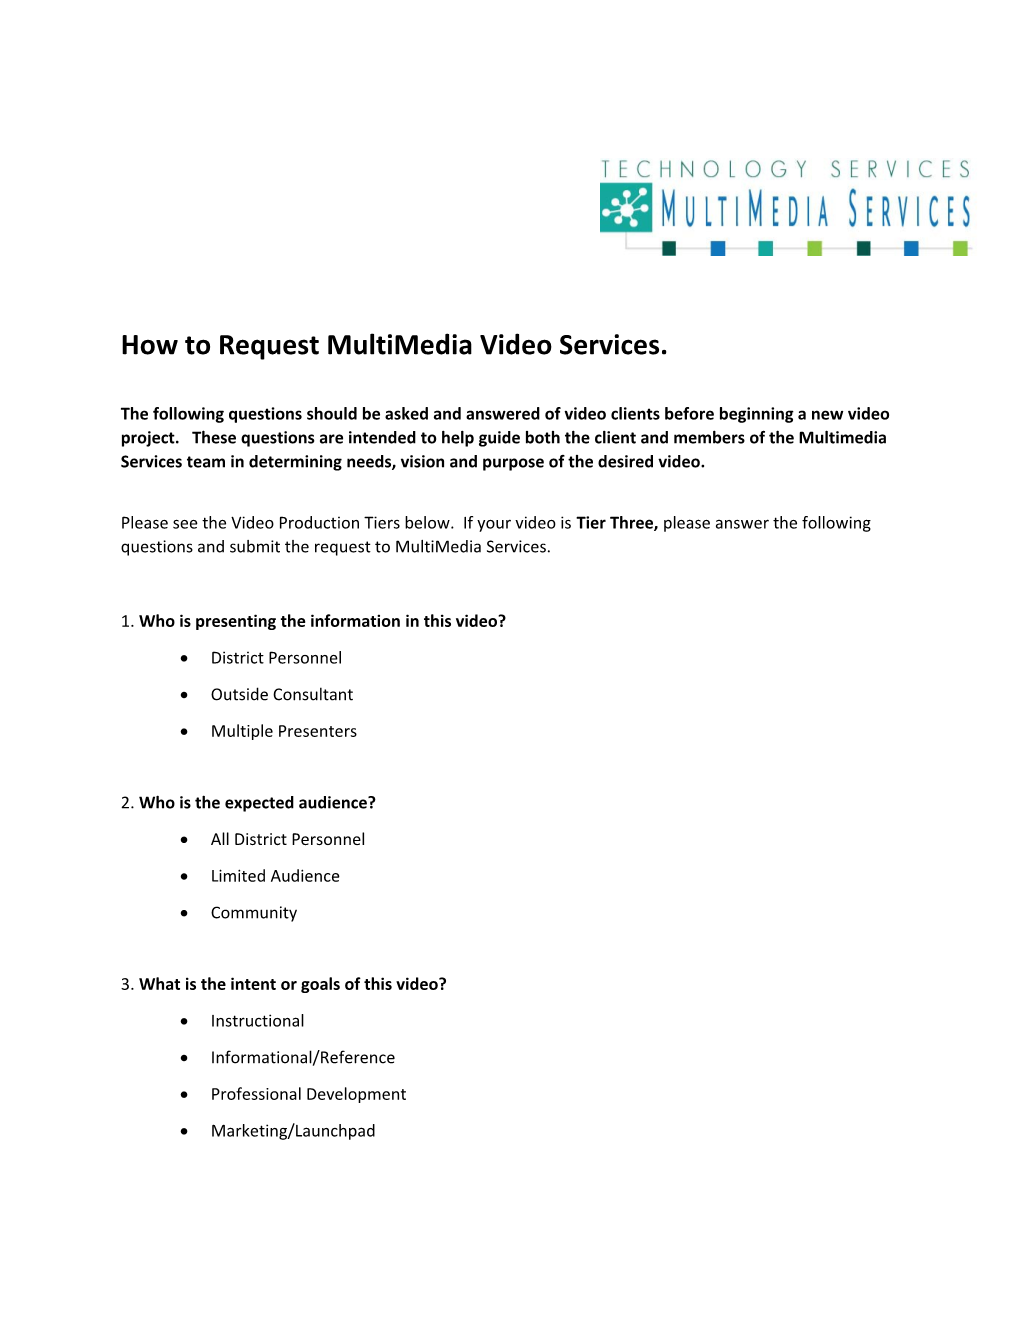 How to Request a Video from Multimedia Services